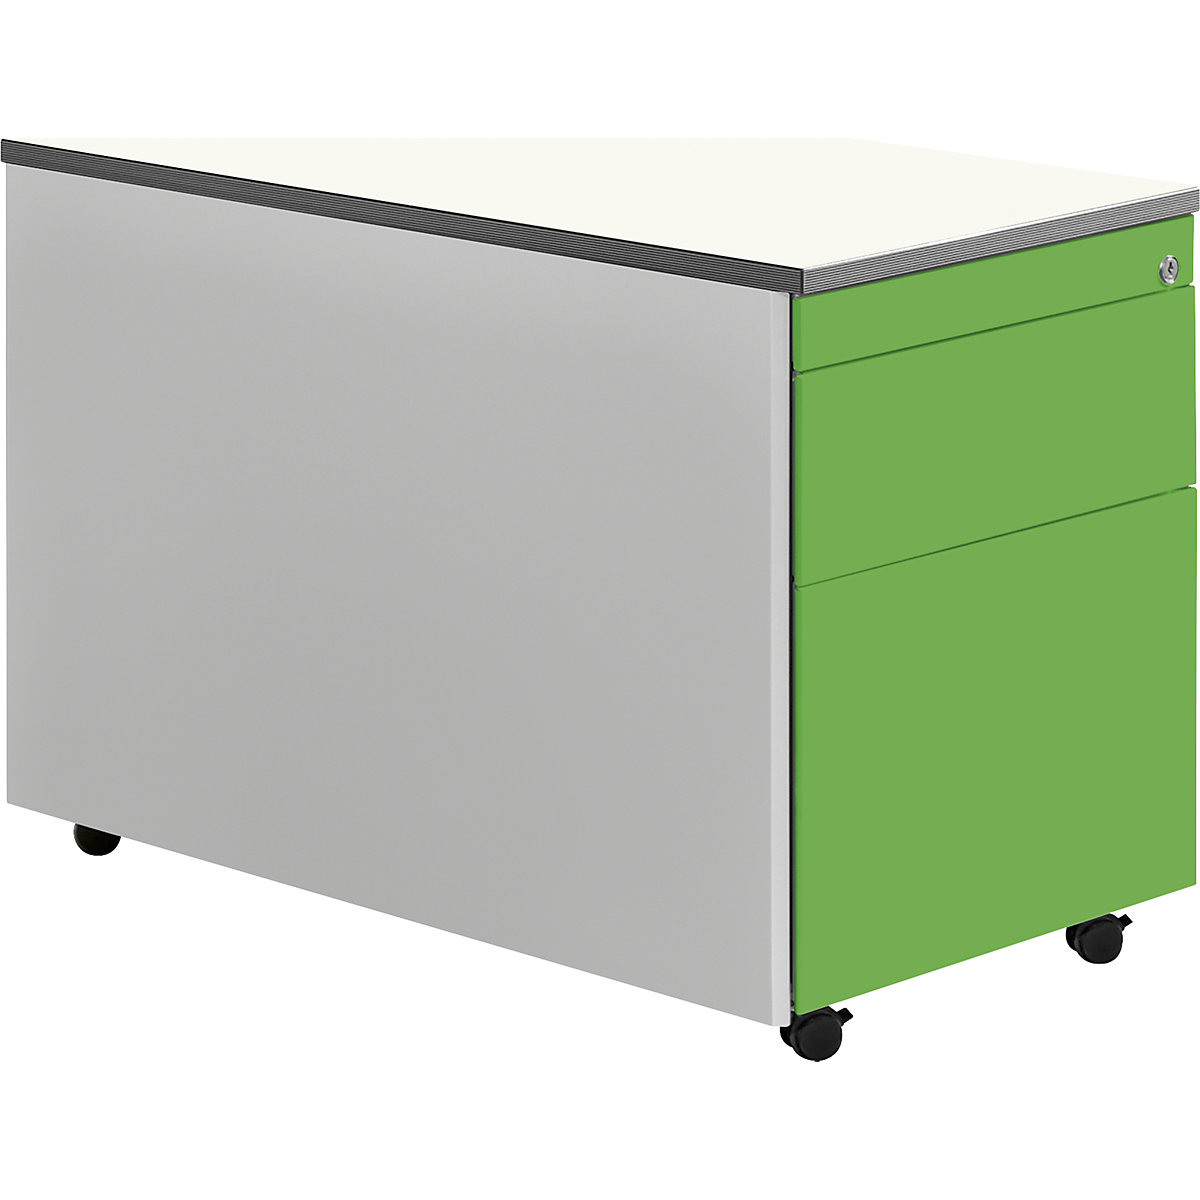 Drawer pedestal with castors – mauser, HxD 579 x 800 mm, plastic panel, 1 drawer, 1 suspension file drawer, white aluminium / yellow green / white-5